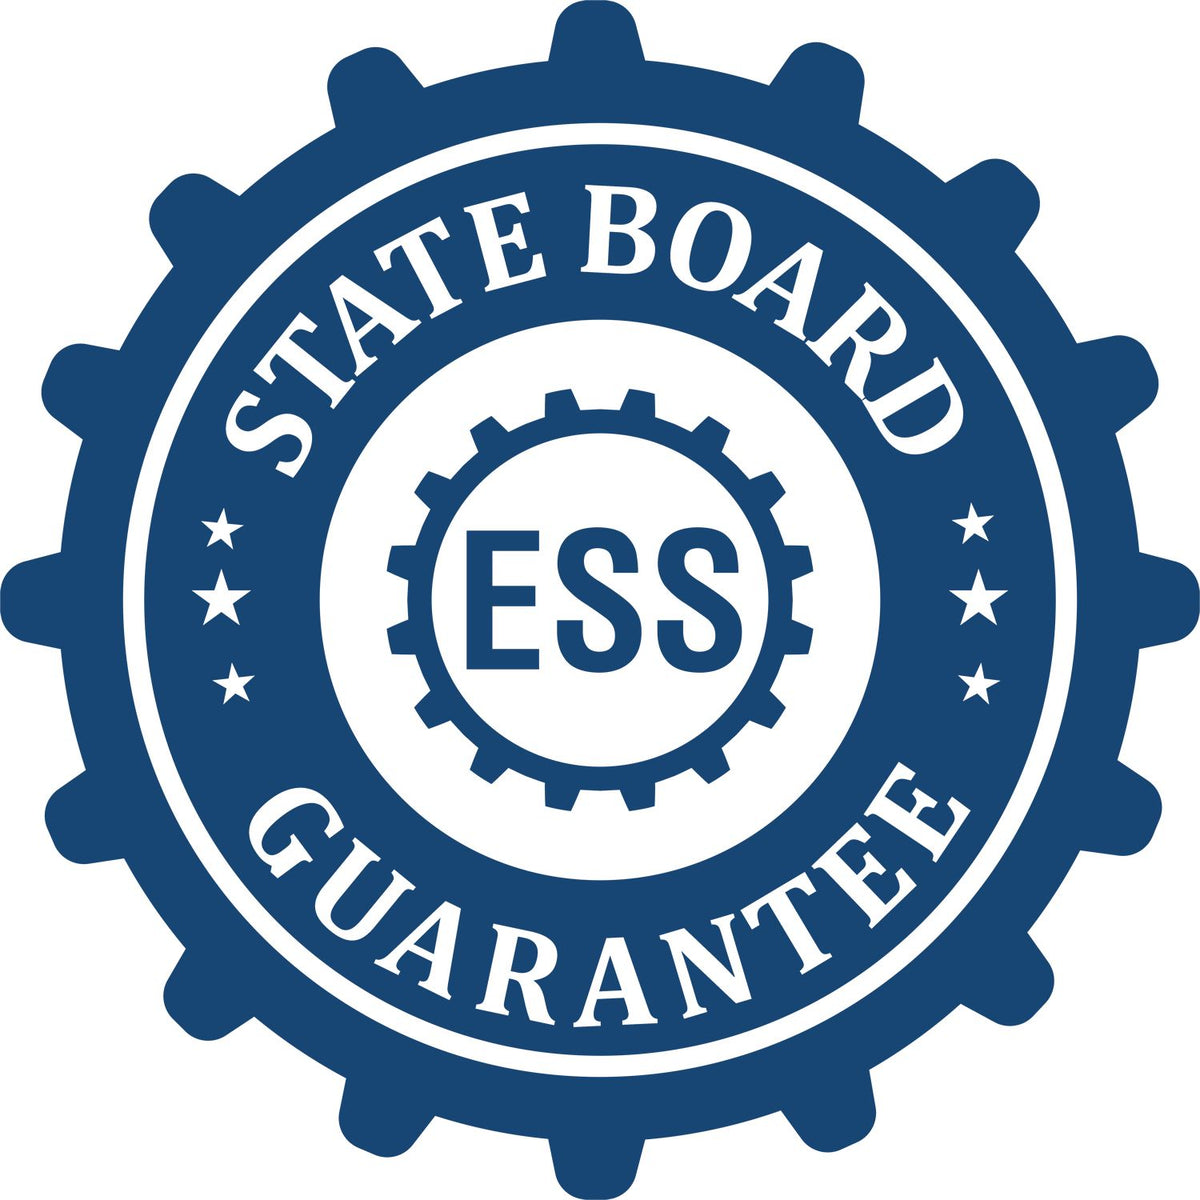 An emblem in a gear shape illustrating a state board guarantee for the Soft Pocket Rhode Island Landscape Architect Embosser product.